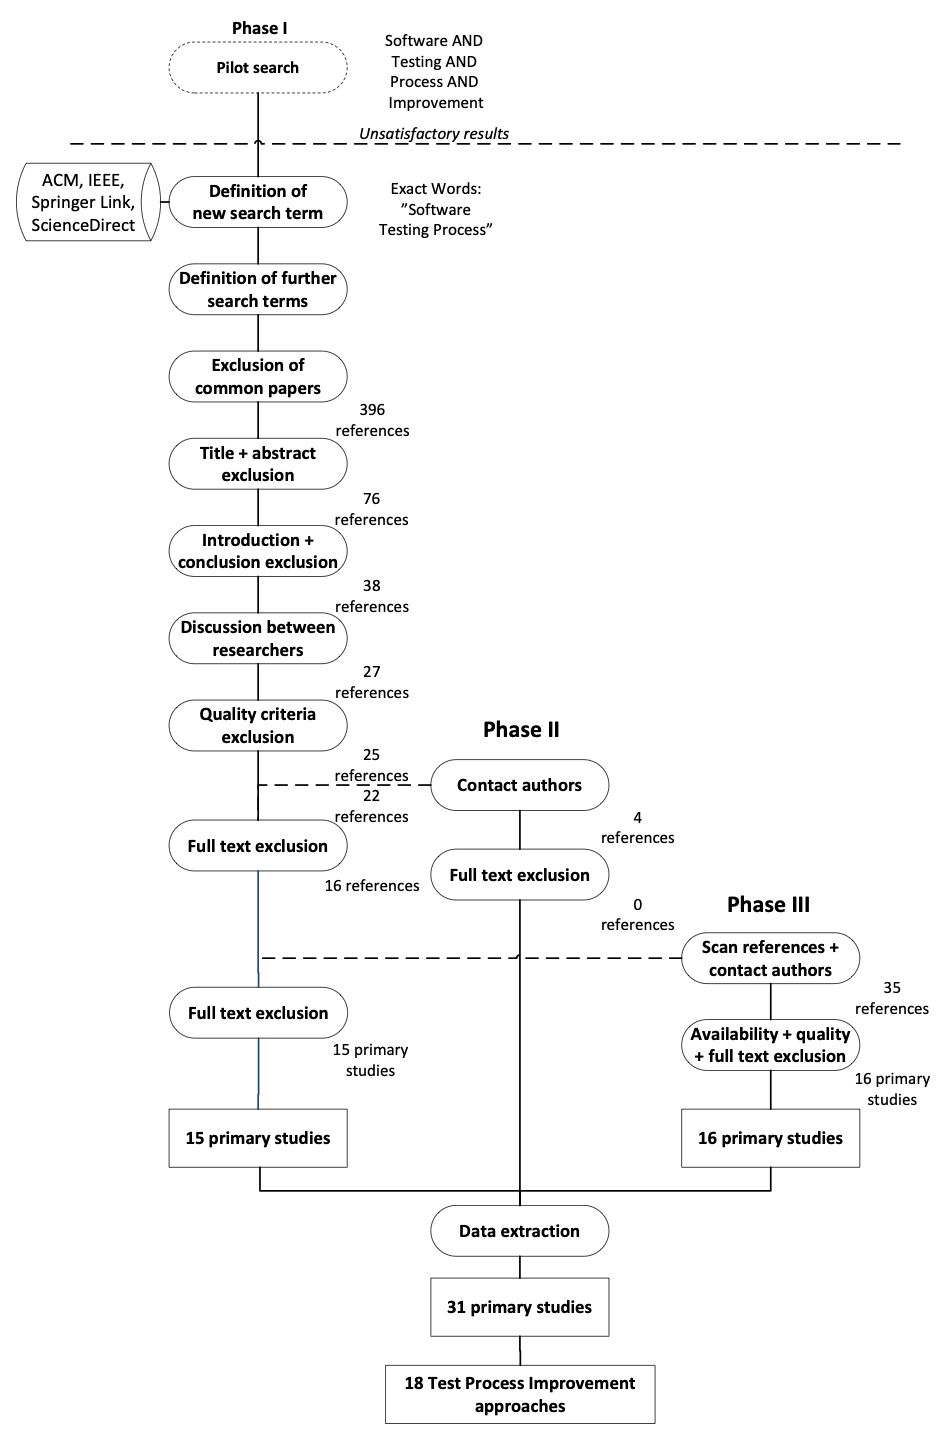 Process overview